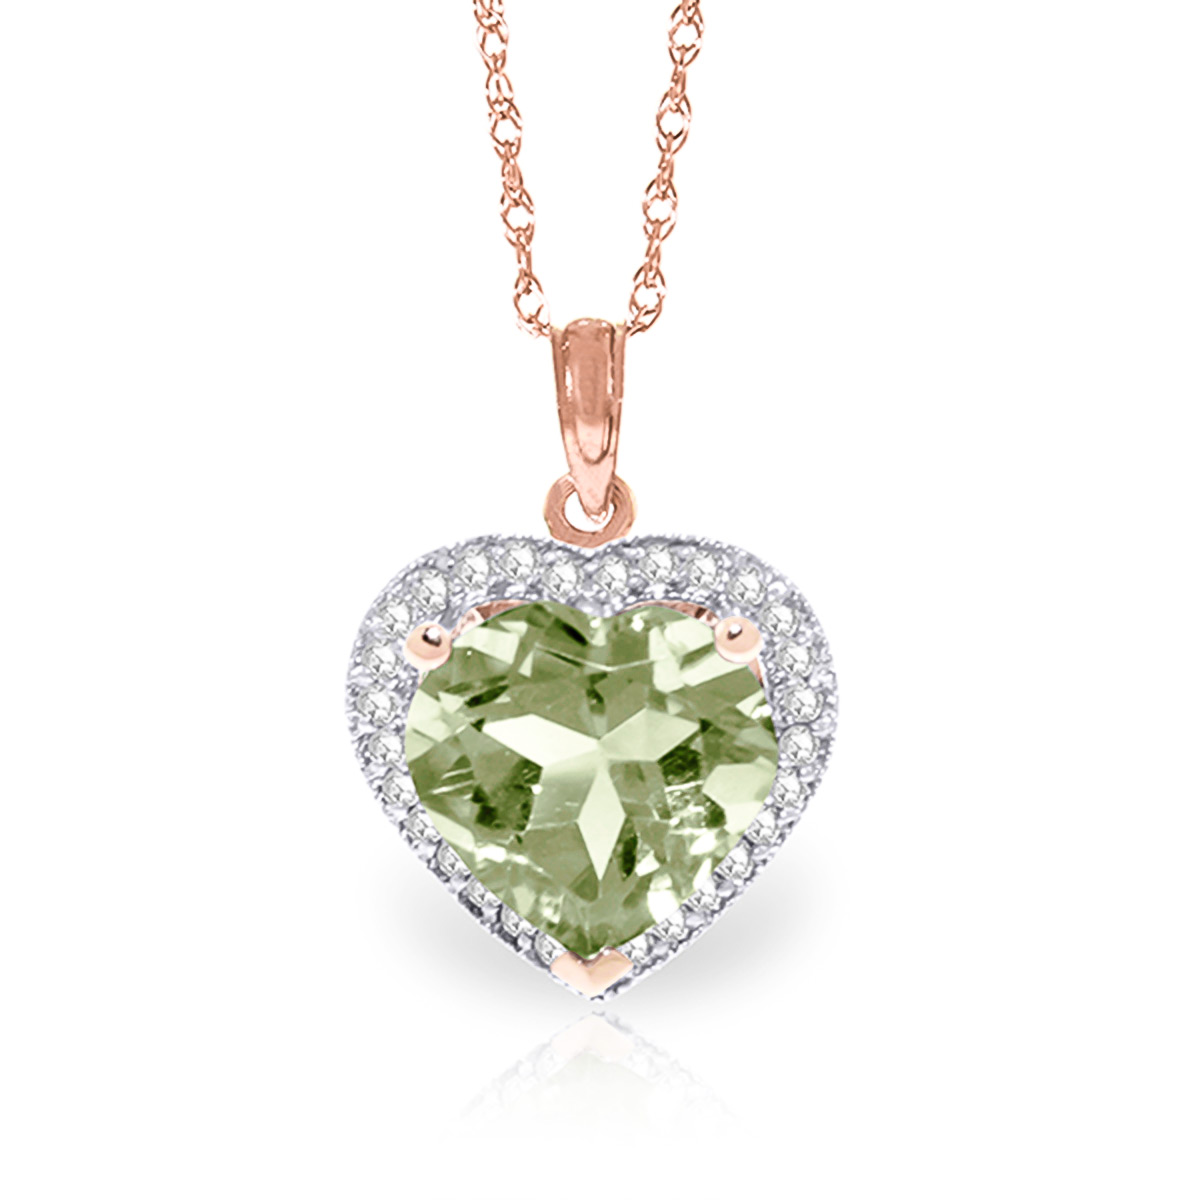 Green Amethyst Halo Pendant Necklace 3.39 ctw in 9ct Rose Gold